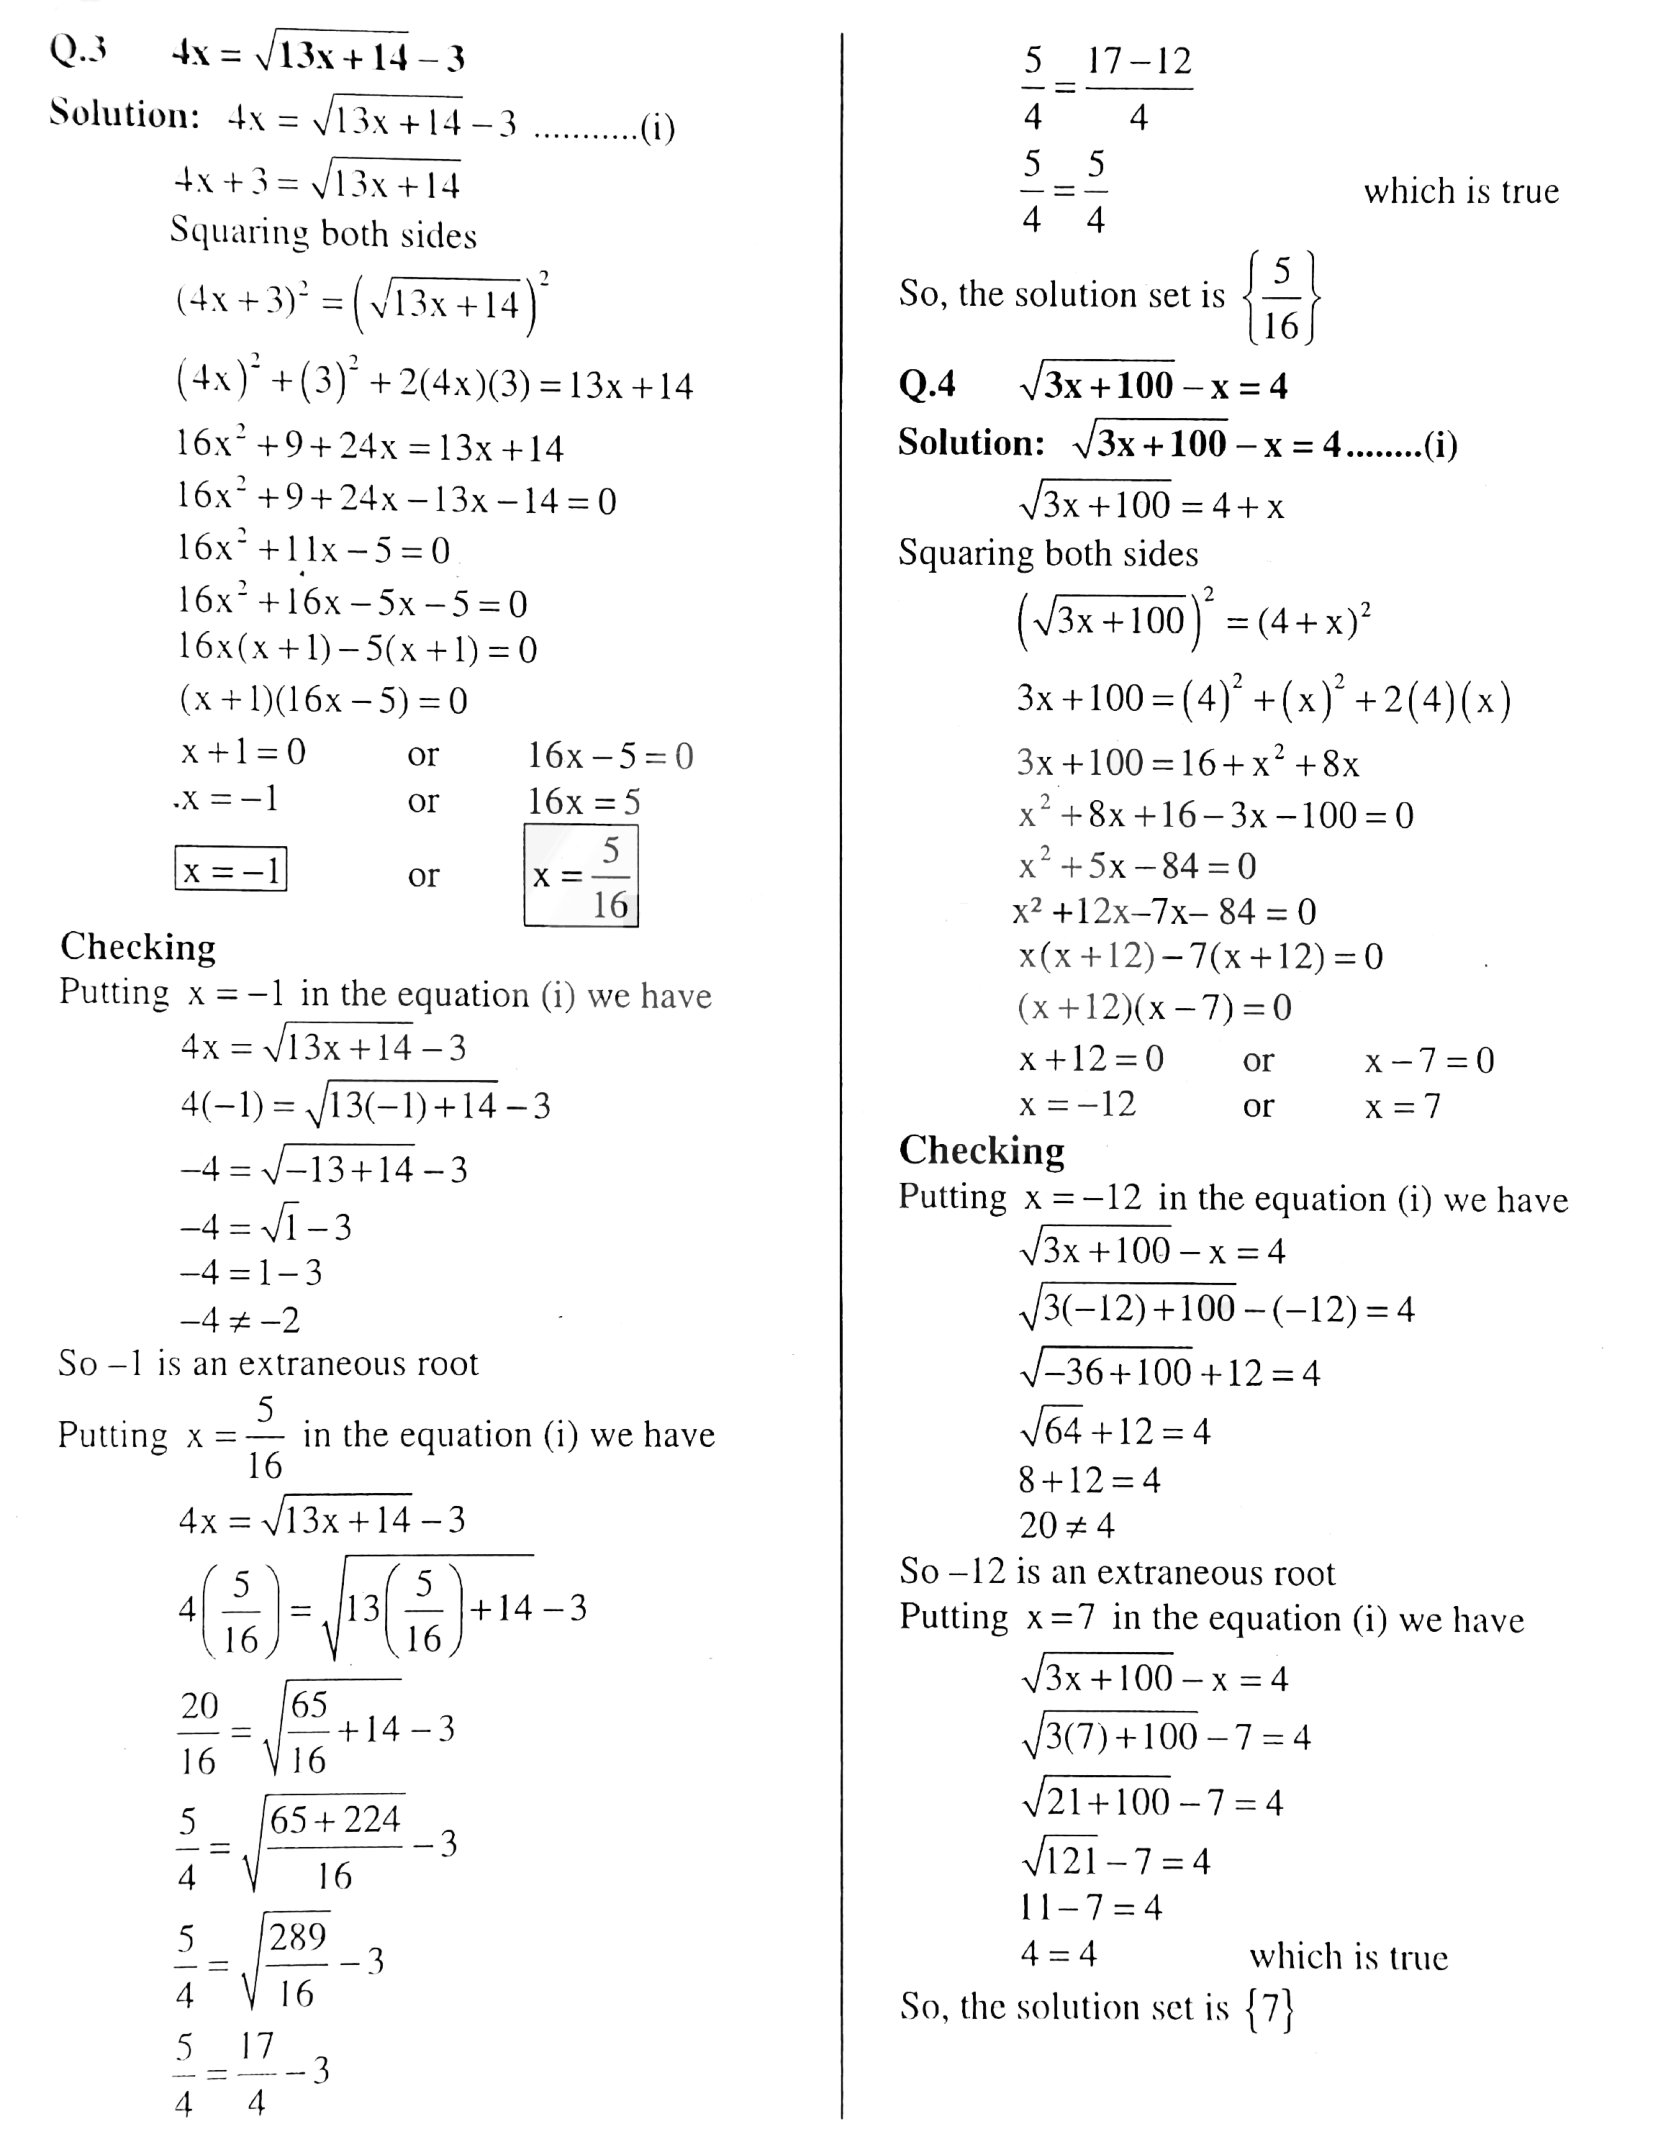 Class 10 Math Notes Chapter 1 Notes Exercise 1.4 Quadratic Equations